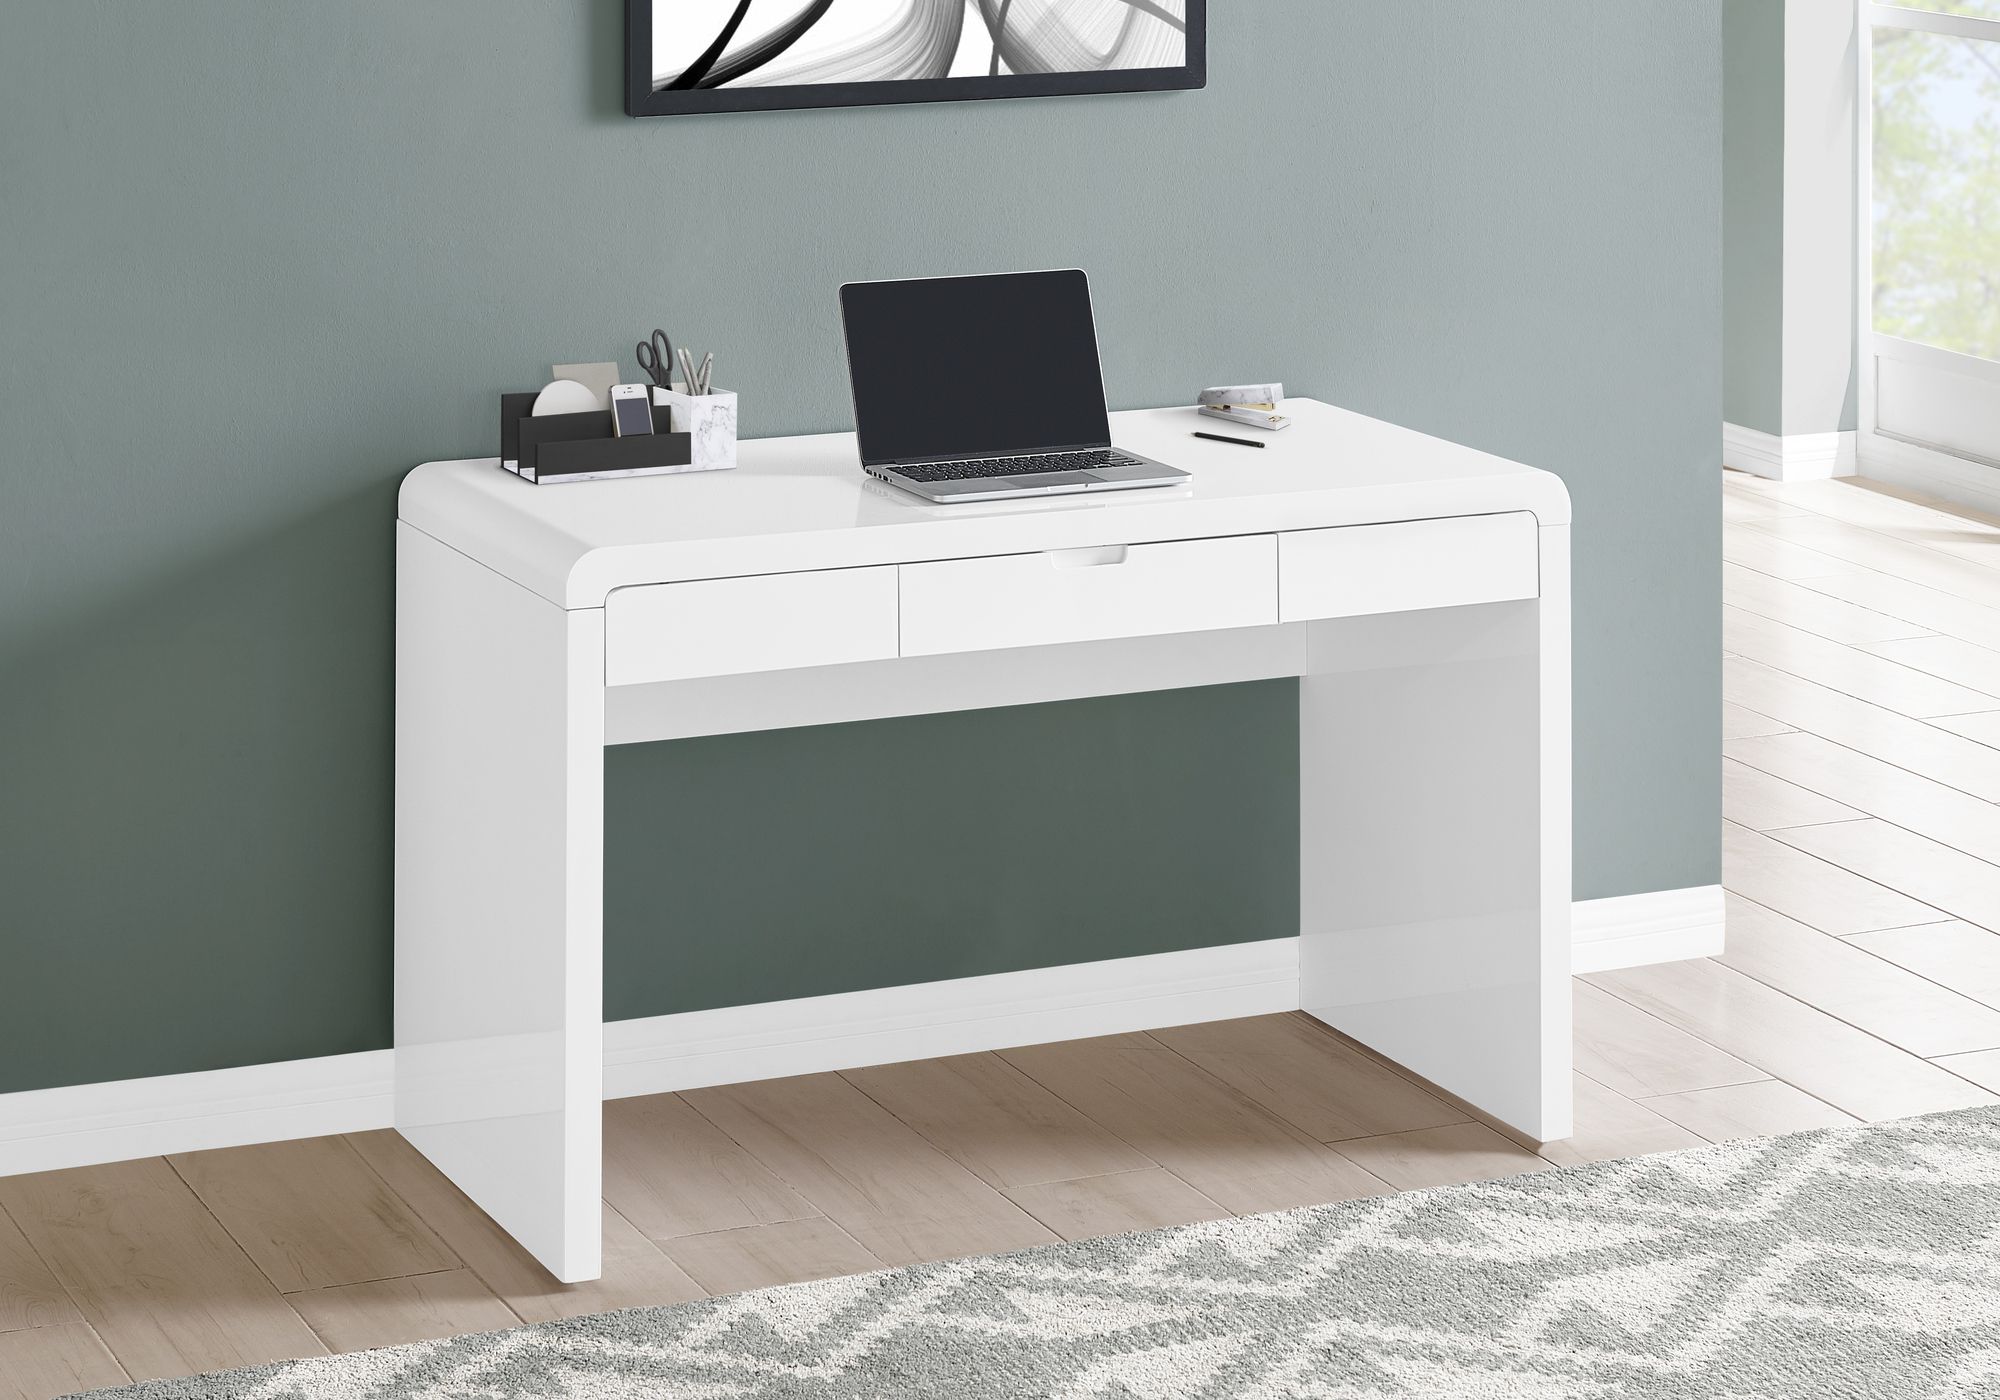 I 7580 - COMPUTER DESK - 48"L / HIGH GLOSSY WHITE / STORAGE DRAWER BY MONARCH SPECIALTIES INC